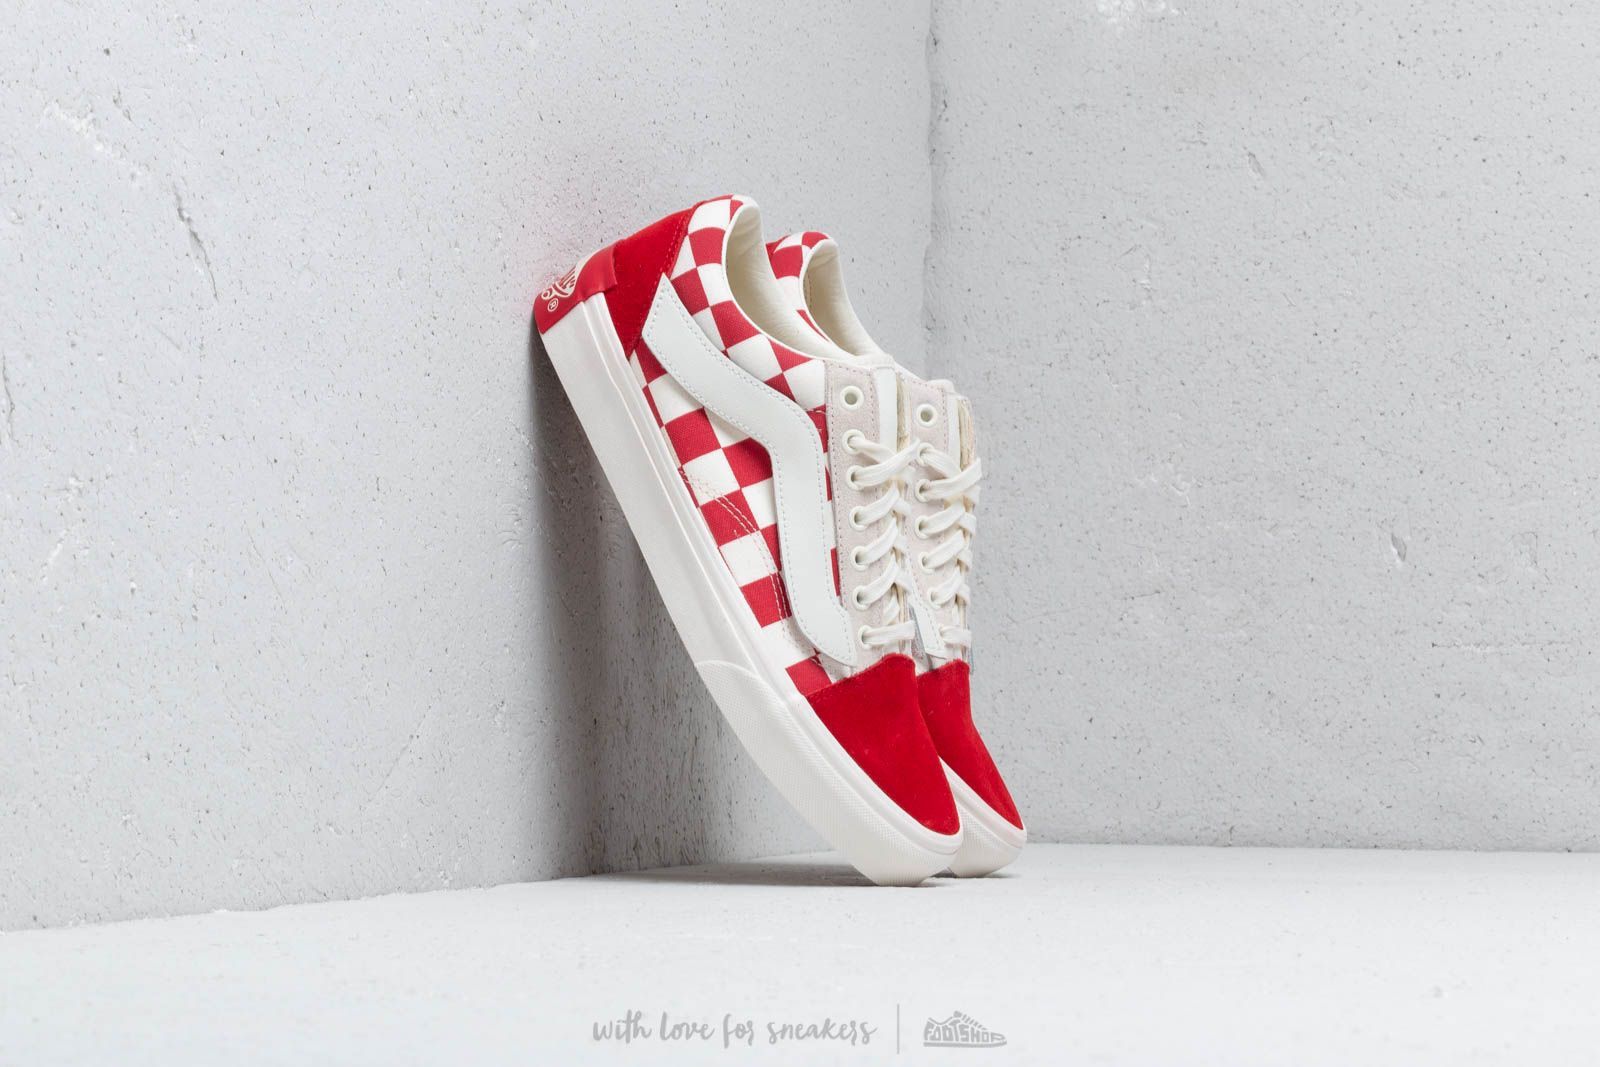 Men's shoes Vans x Purlicue Old Skool "Year Of The Pig" Rage Red/ Marshmallow